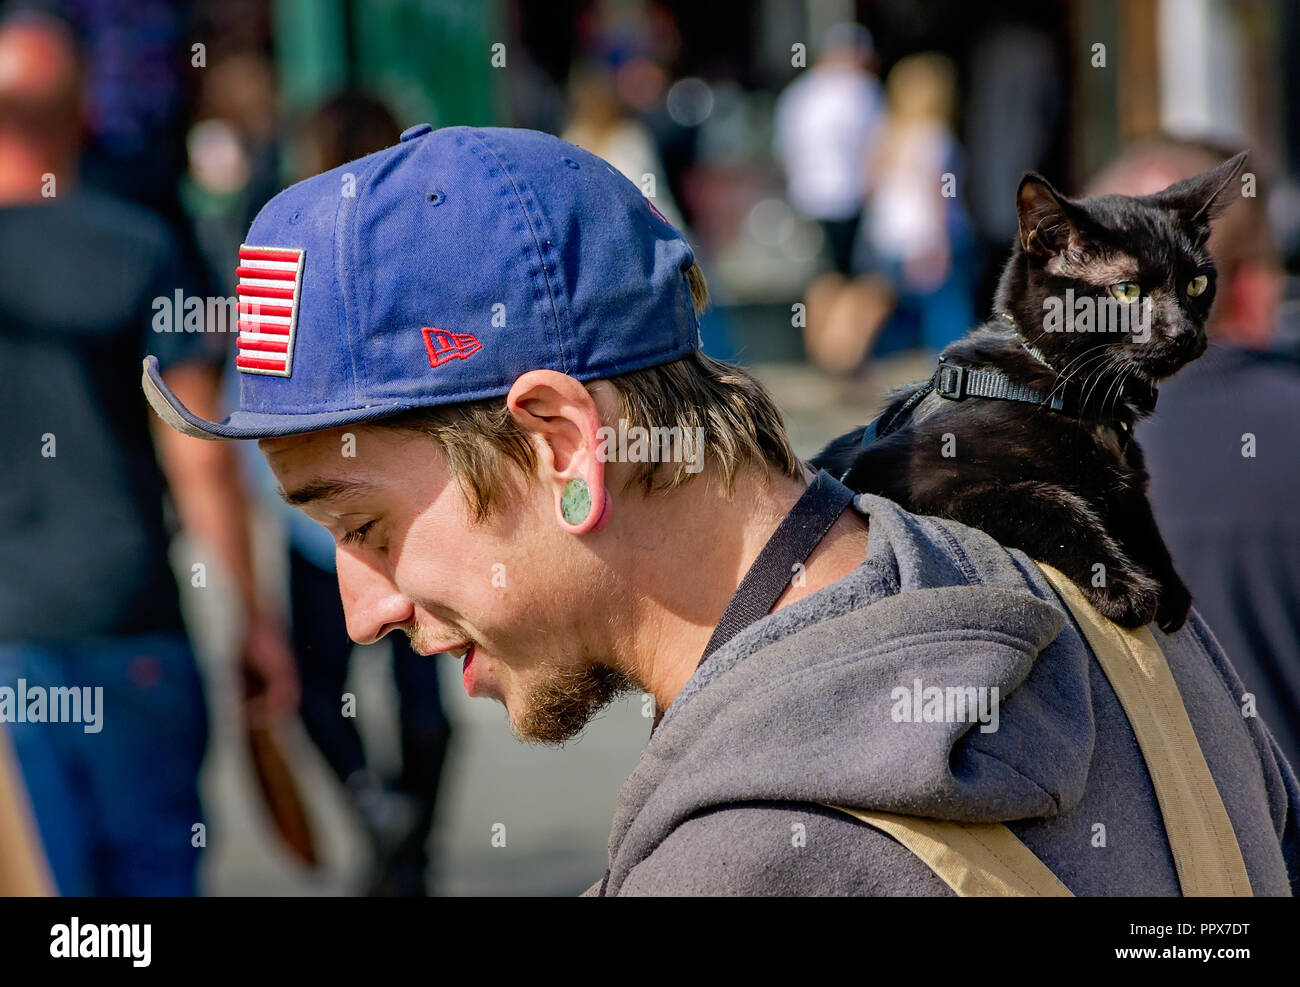 A man wearing a plug earring and a hoodie carries a black cat wearing a harness on his shoulder, Nov. 15, 2015, in New Orleans, Louisiana. Stock Photo